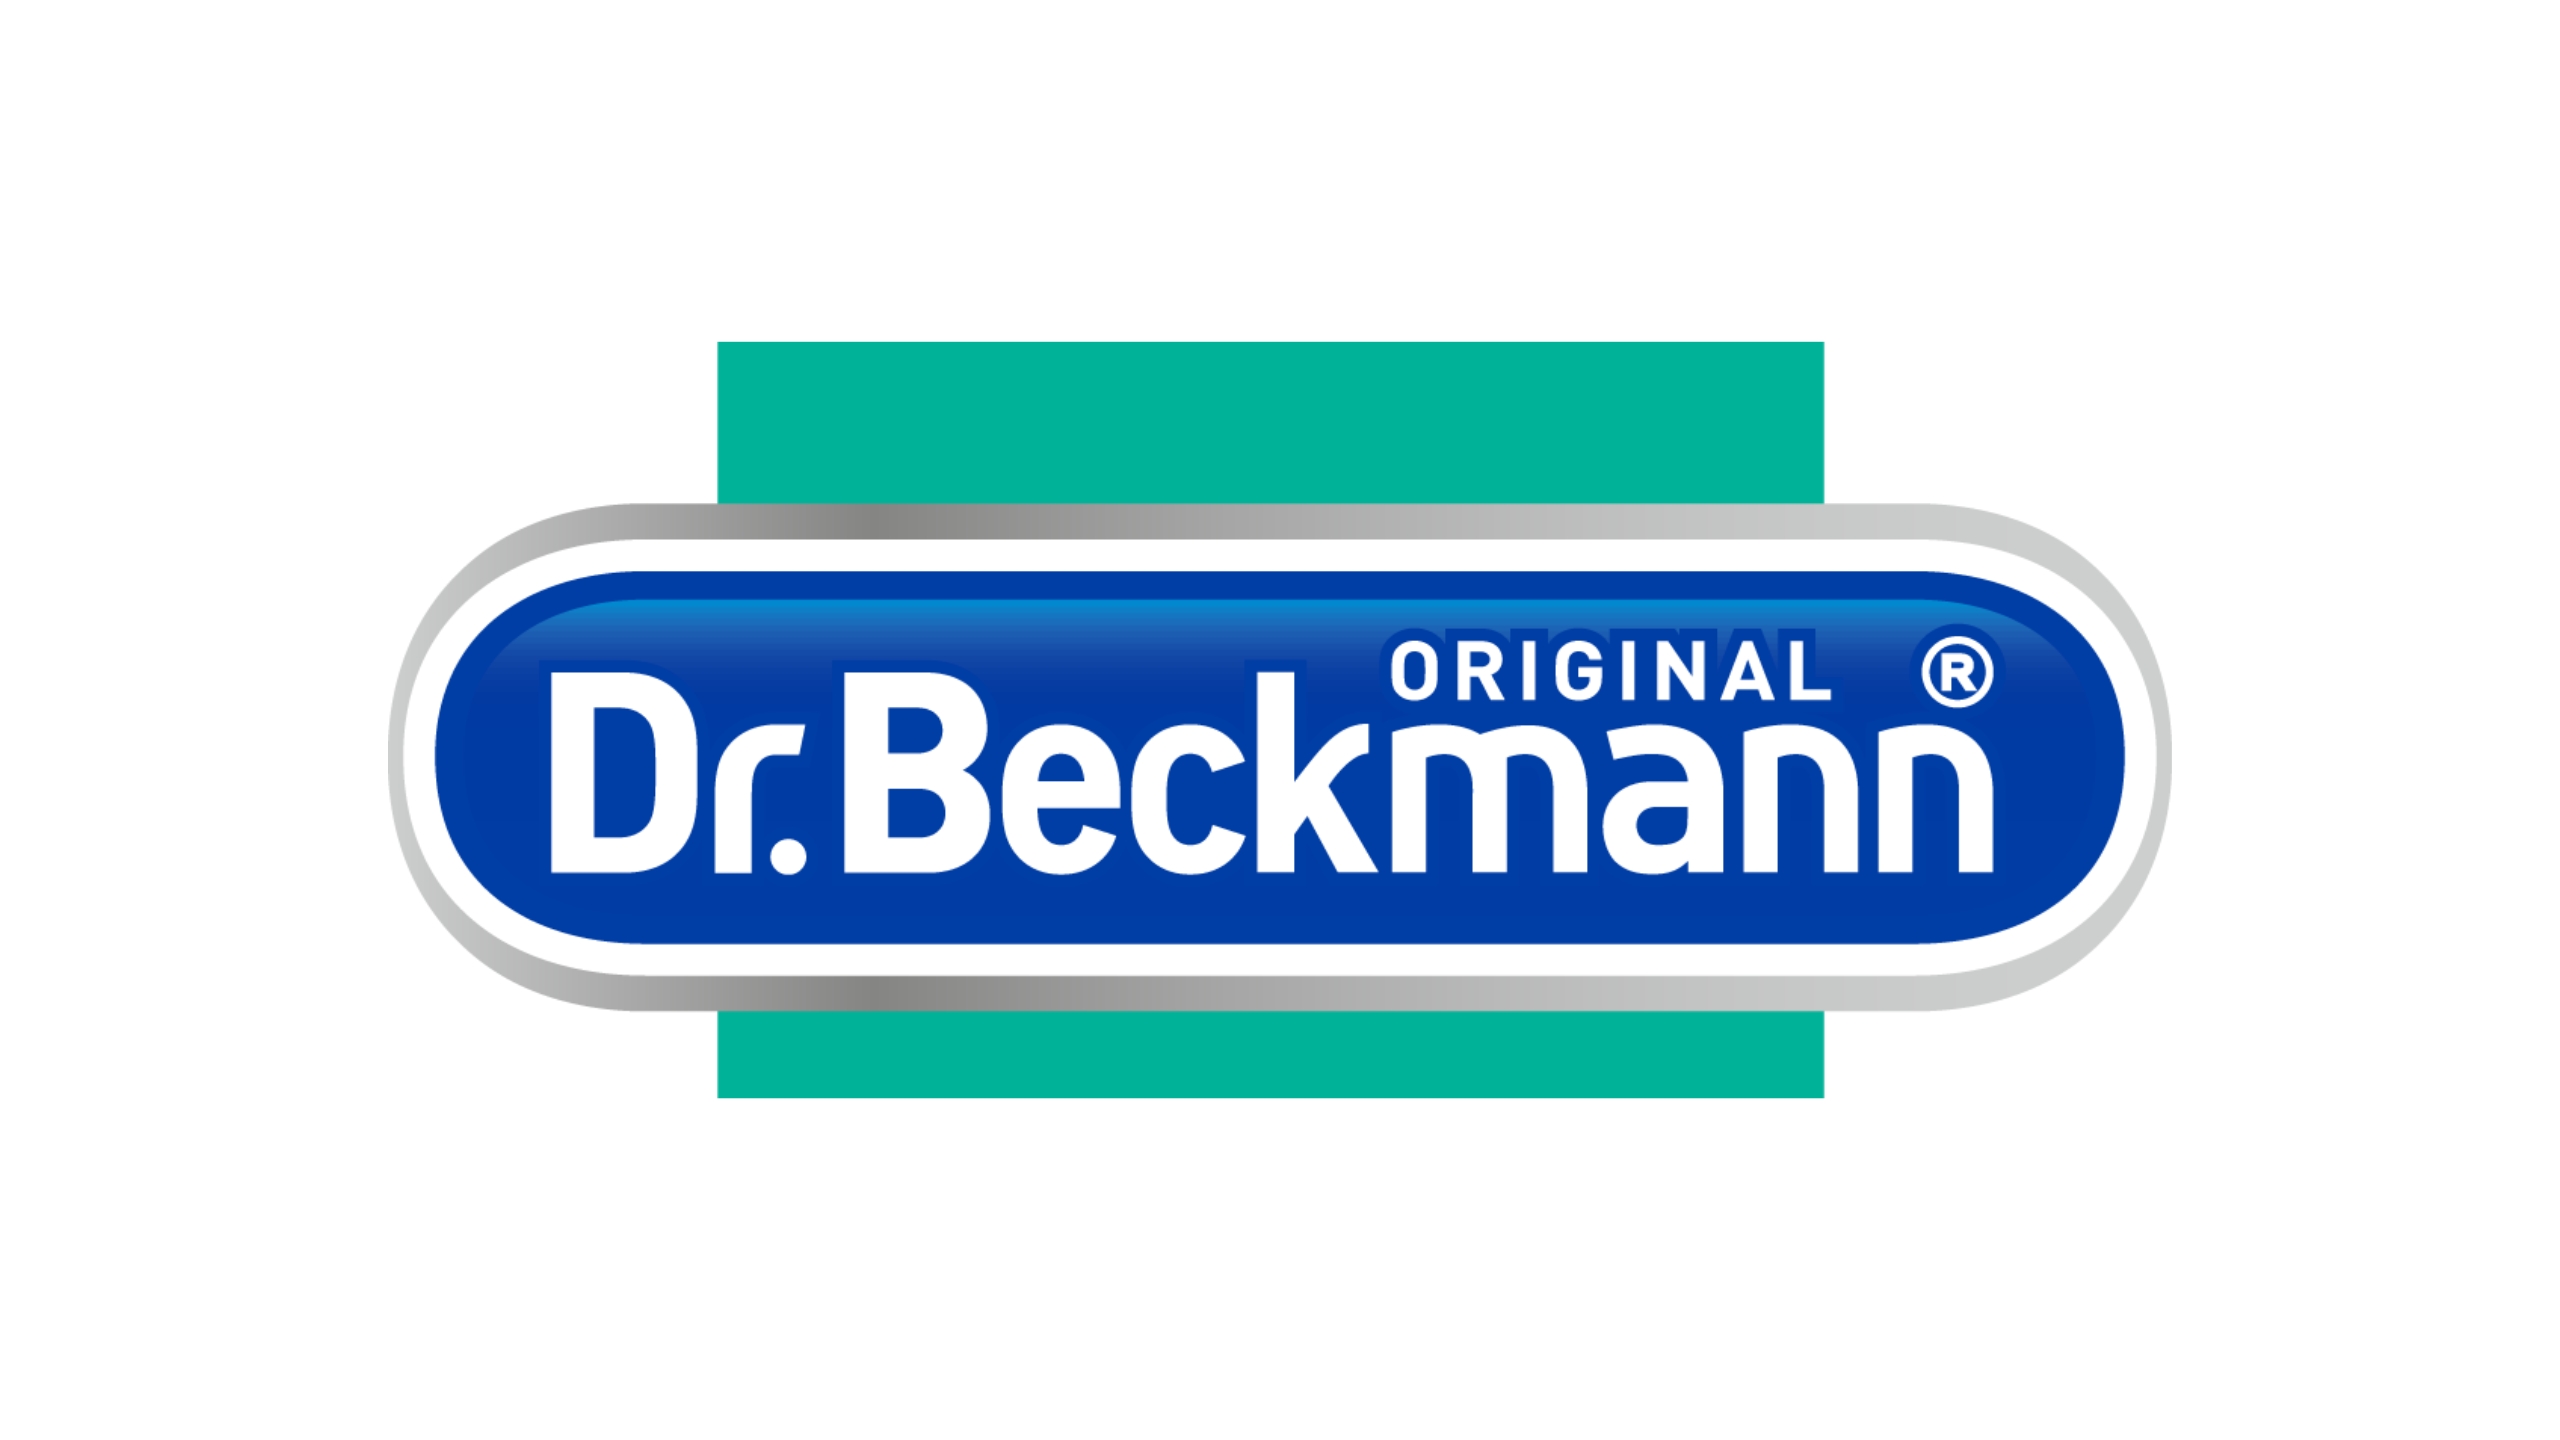 Welcome to Dr. Beckmann